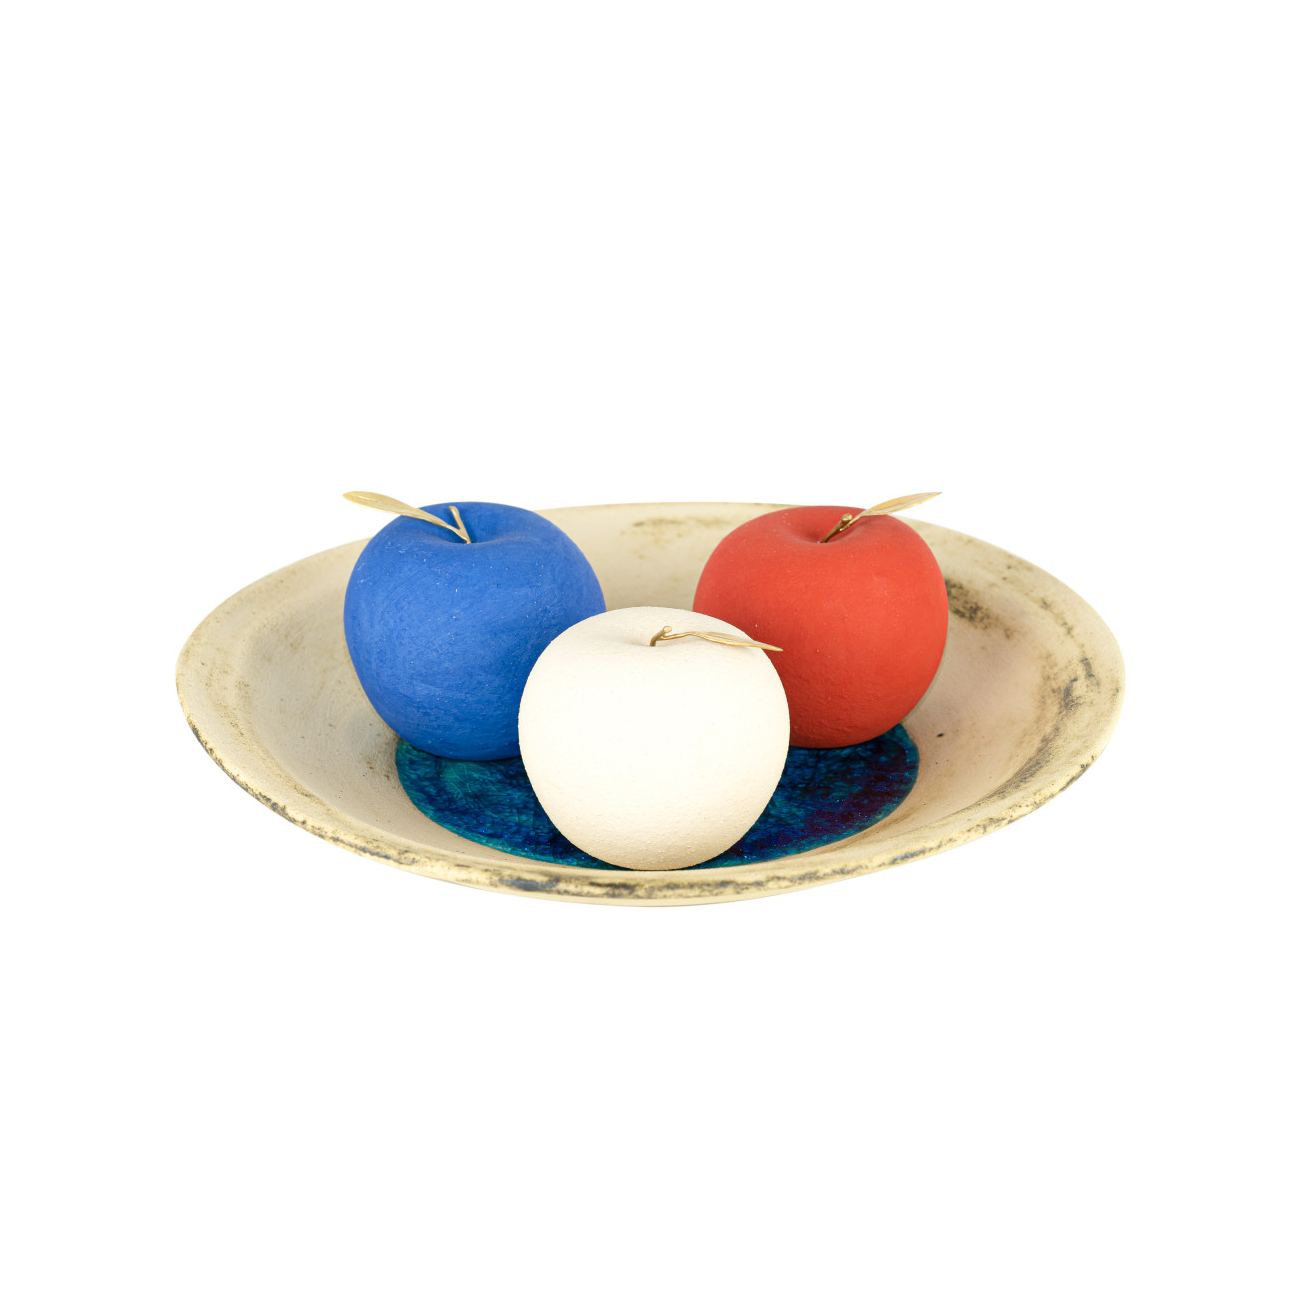 Details about   Set of 3 Handmade Ceramic & Brass Decorative Apples White & Blue Red 